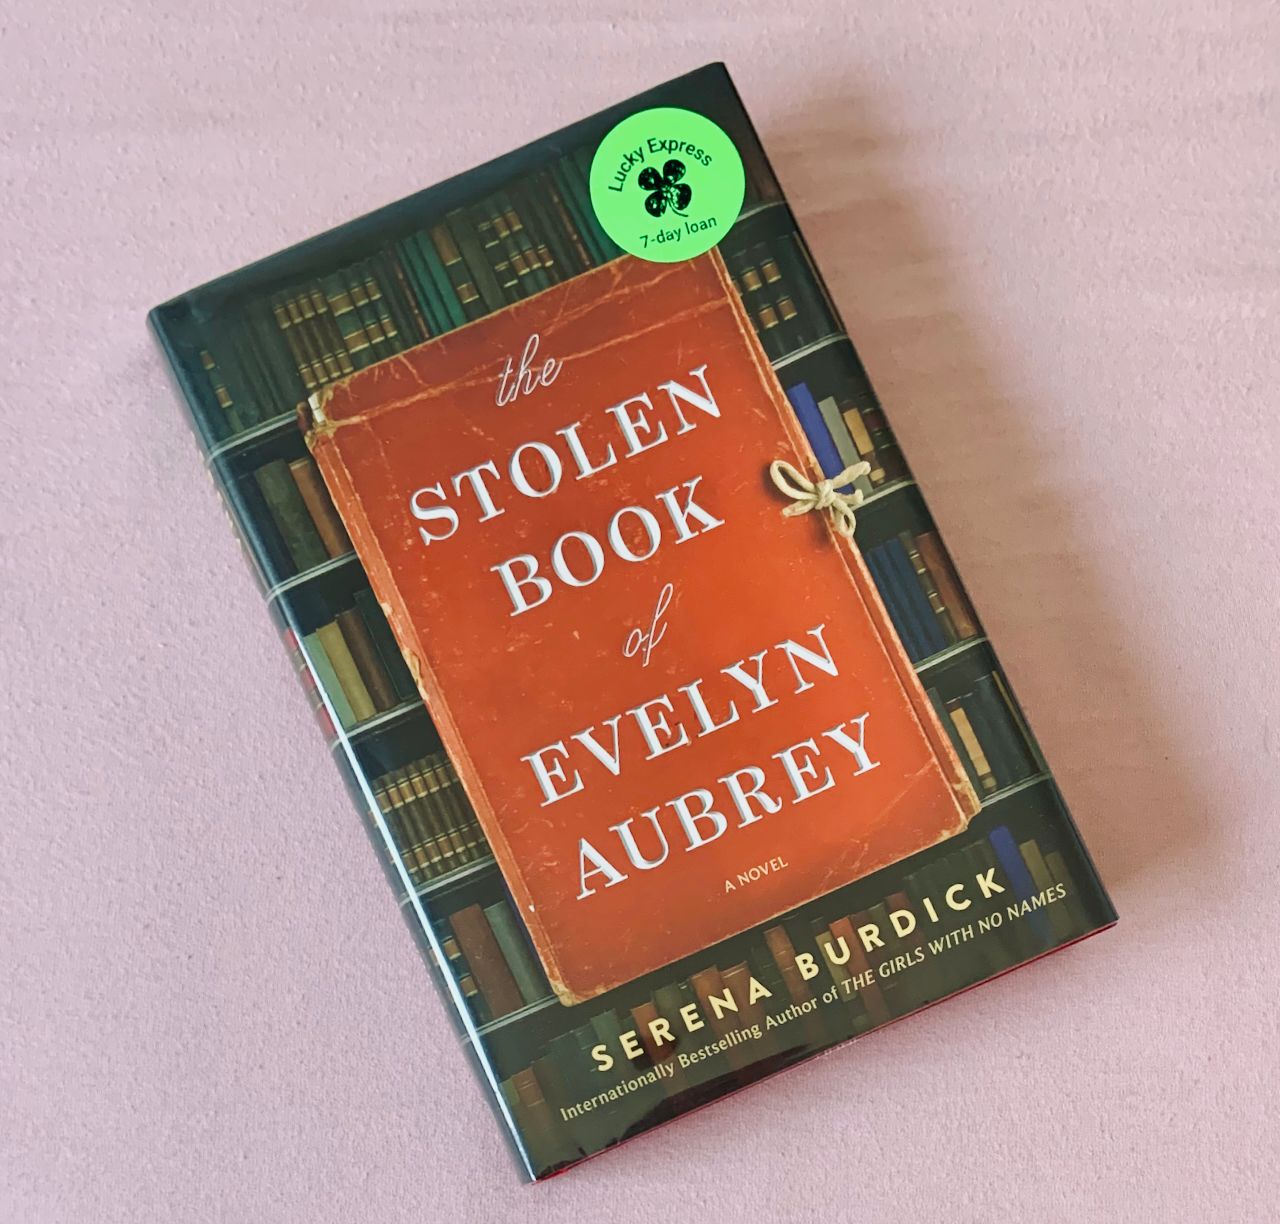 Hardcover copy of The Stolen Book of Evelyn Aubrey by Serena Burdick featuring a red journal against a bookshelf